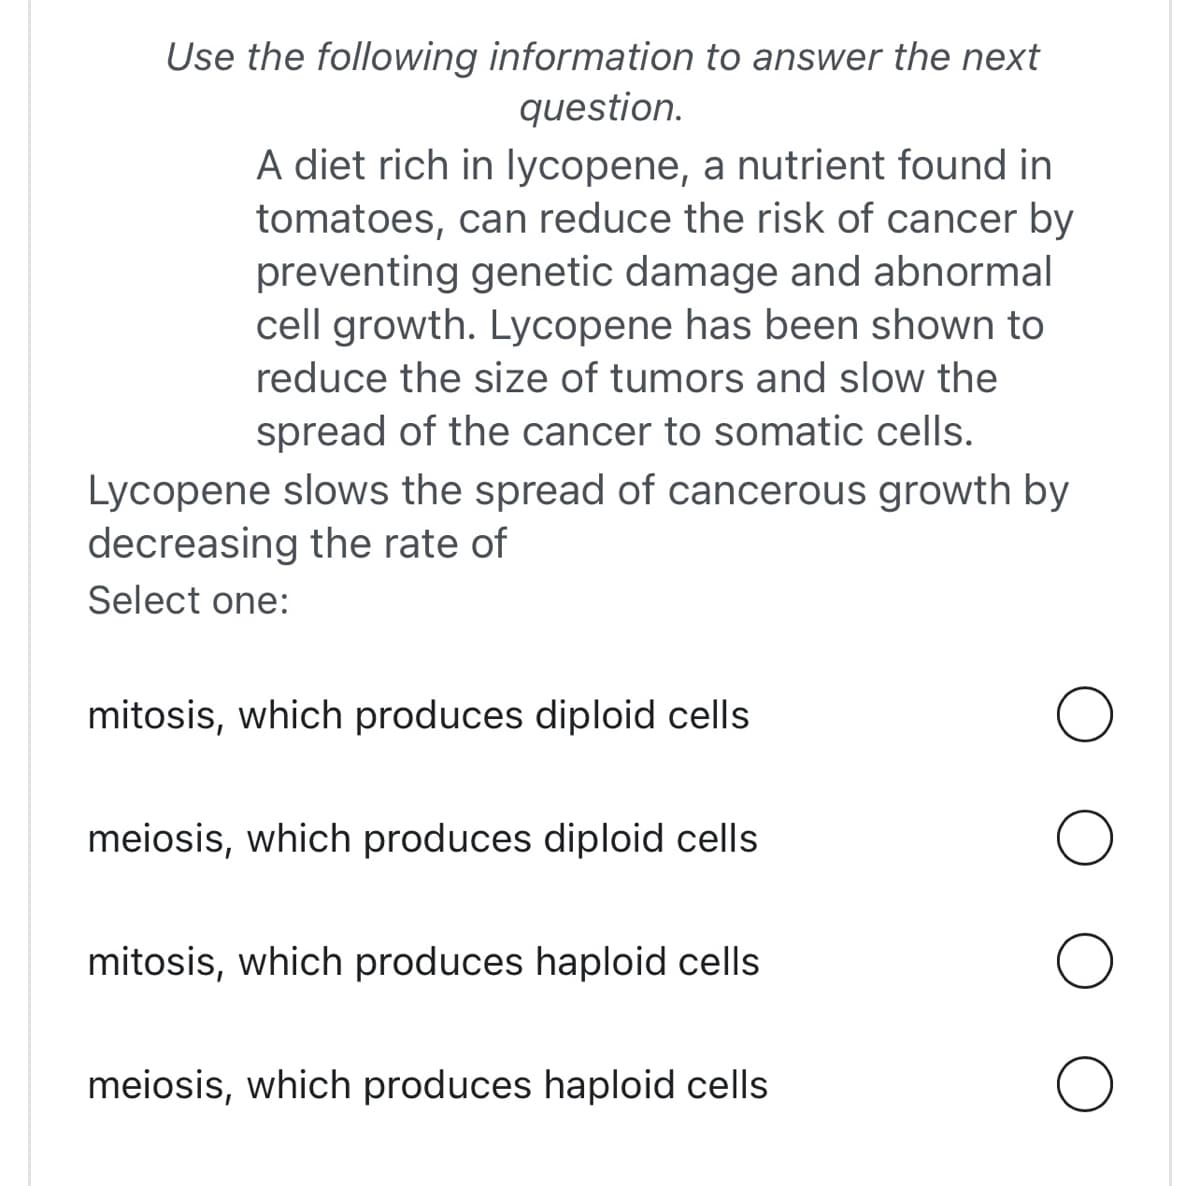 Use the following information to answer the next
question.
A diet rich in lycopene, a nutrient found in
tomatoes, can reduce the risk of cancer by
preventing genetic damage and abnormal
cell growth. Lycopene has been shown to
reduce the size of tumors and slow the
spread of the cancer to somatic cells.
Lycopene slows the spread of cancerous growth by
decreasing the rate of
Select one:
mitosis, which produces diploid cells
meiosis, which produces diploid cells
mitosis, which produces haploid cells
meiosis, which produces haploid cells
O
O